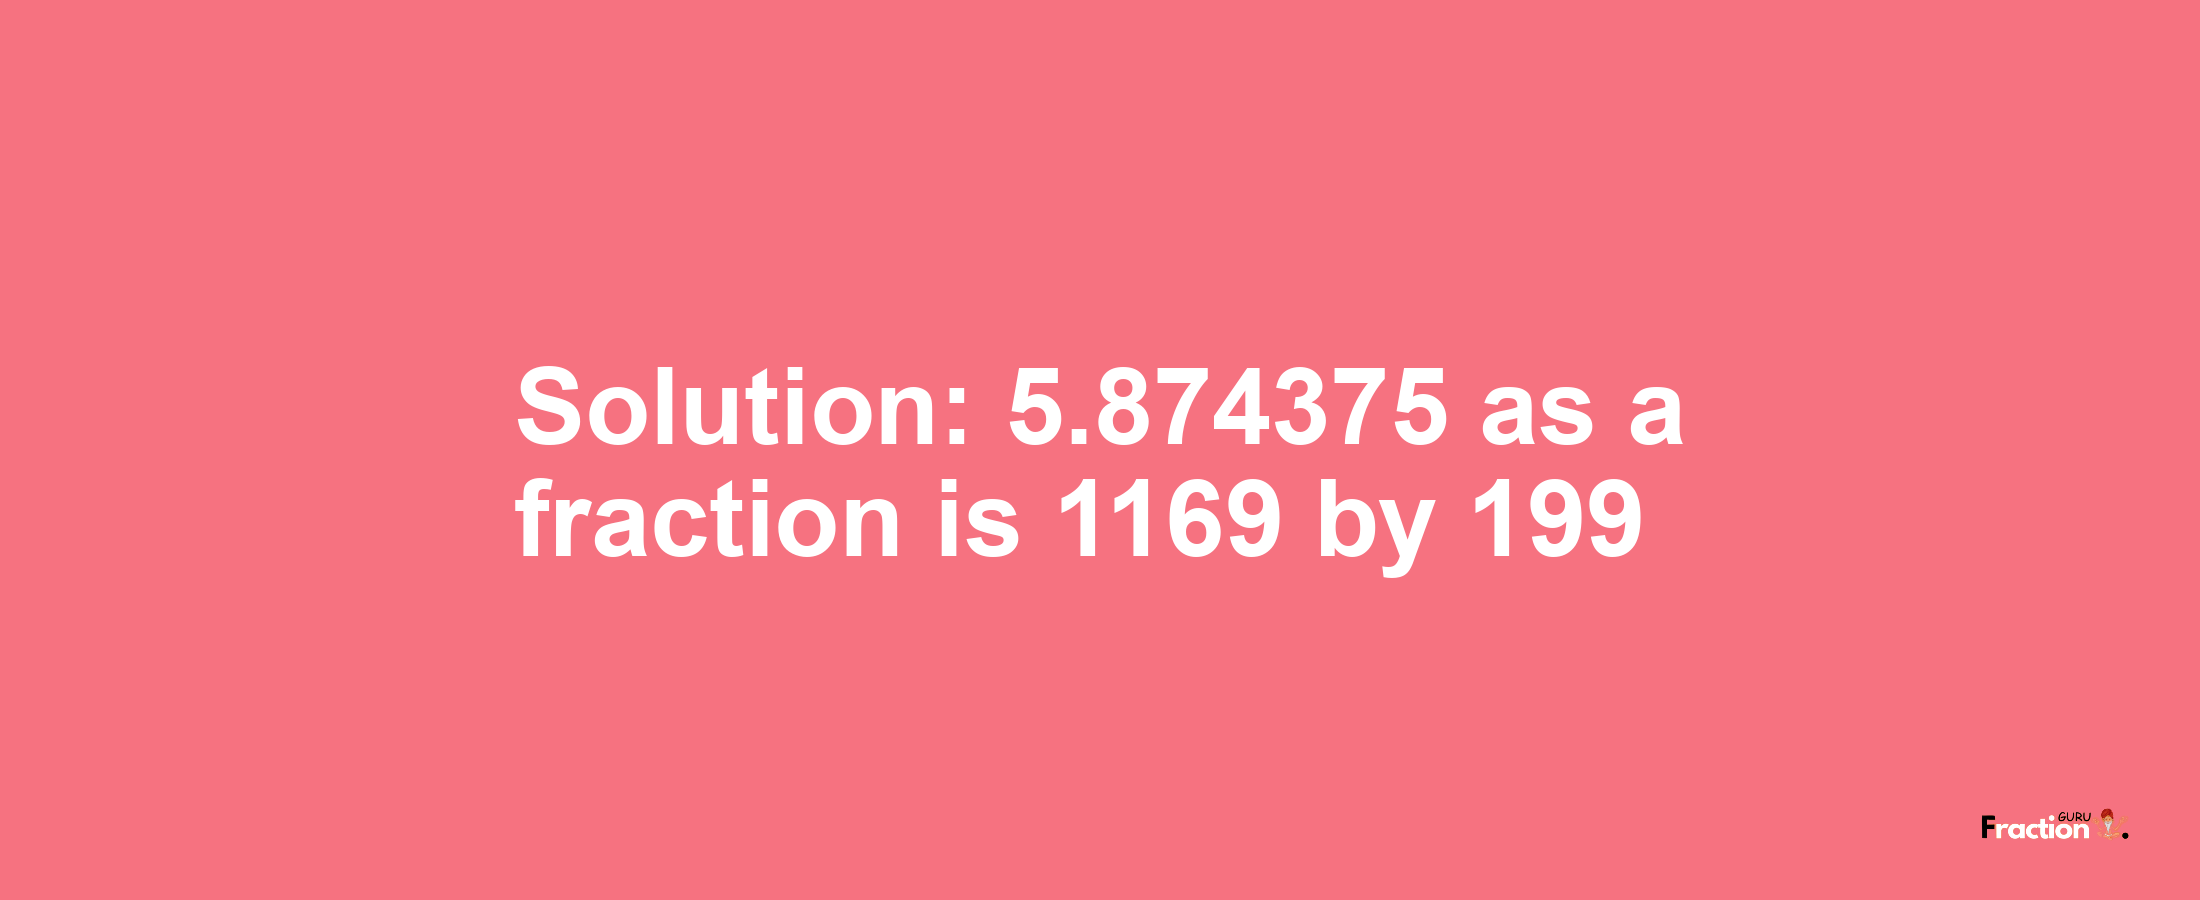 Solution:5.874375 as a fraction is 1169/199